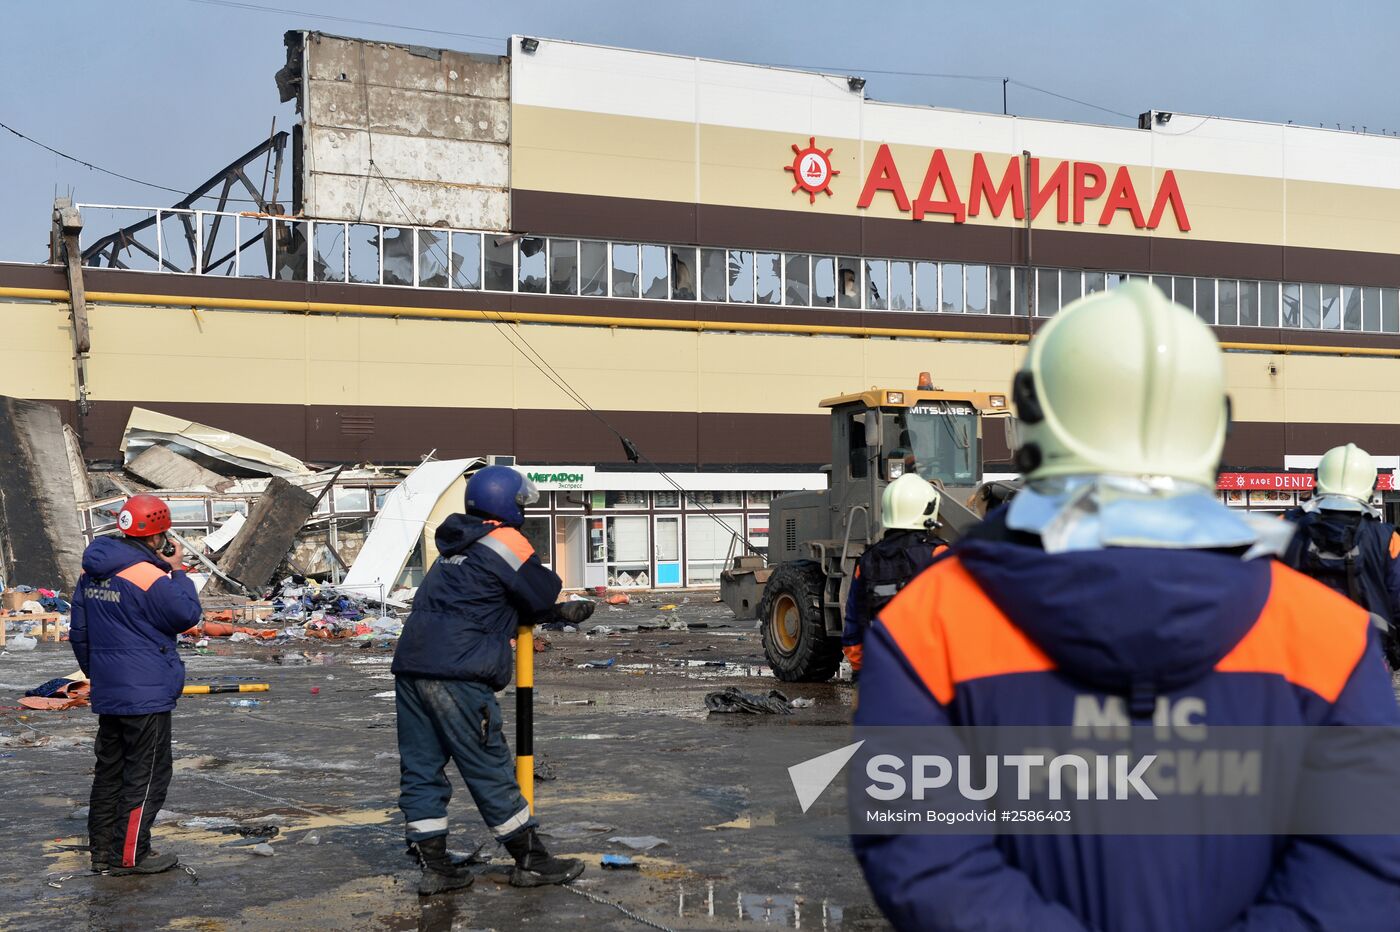 Crews clean up debris after Admiral shopping mall fire in Kazan